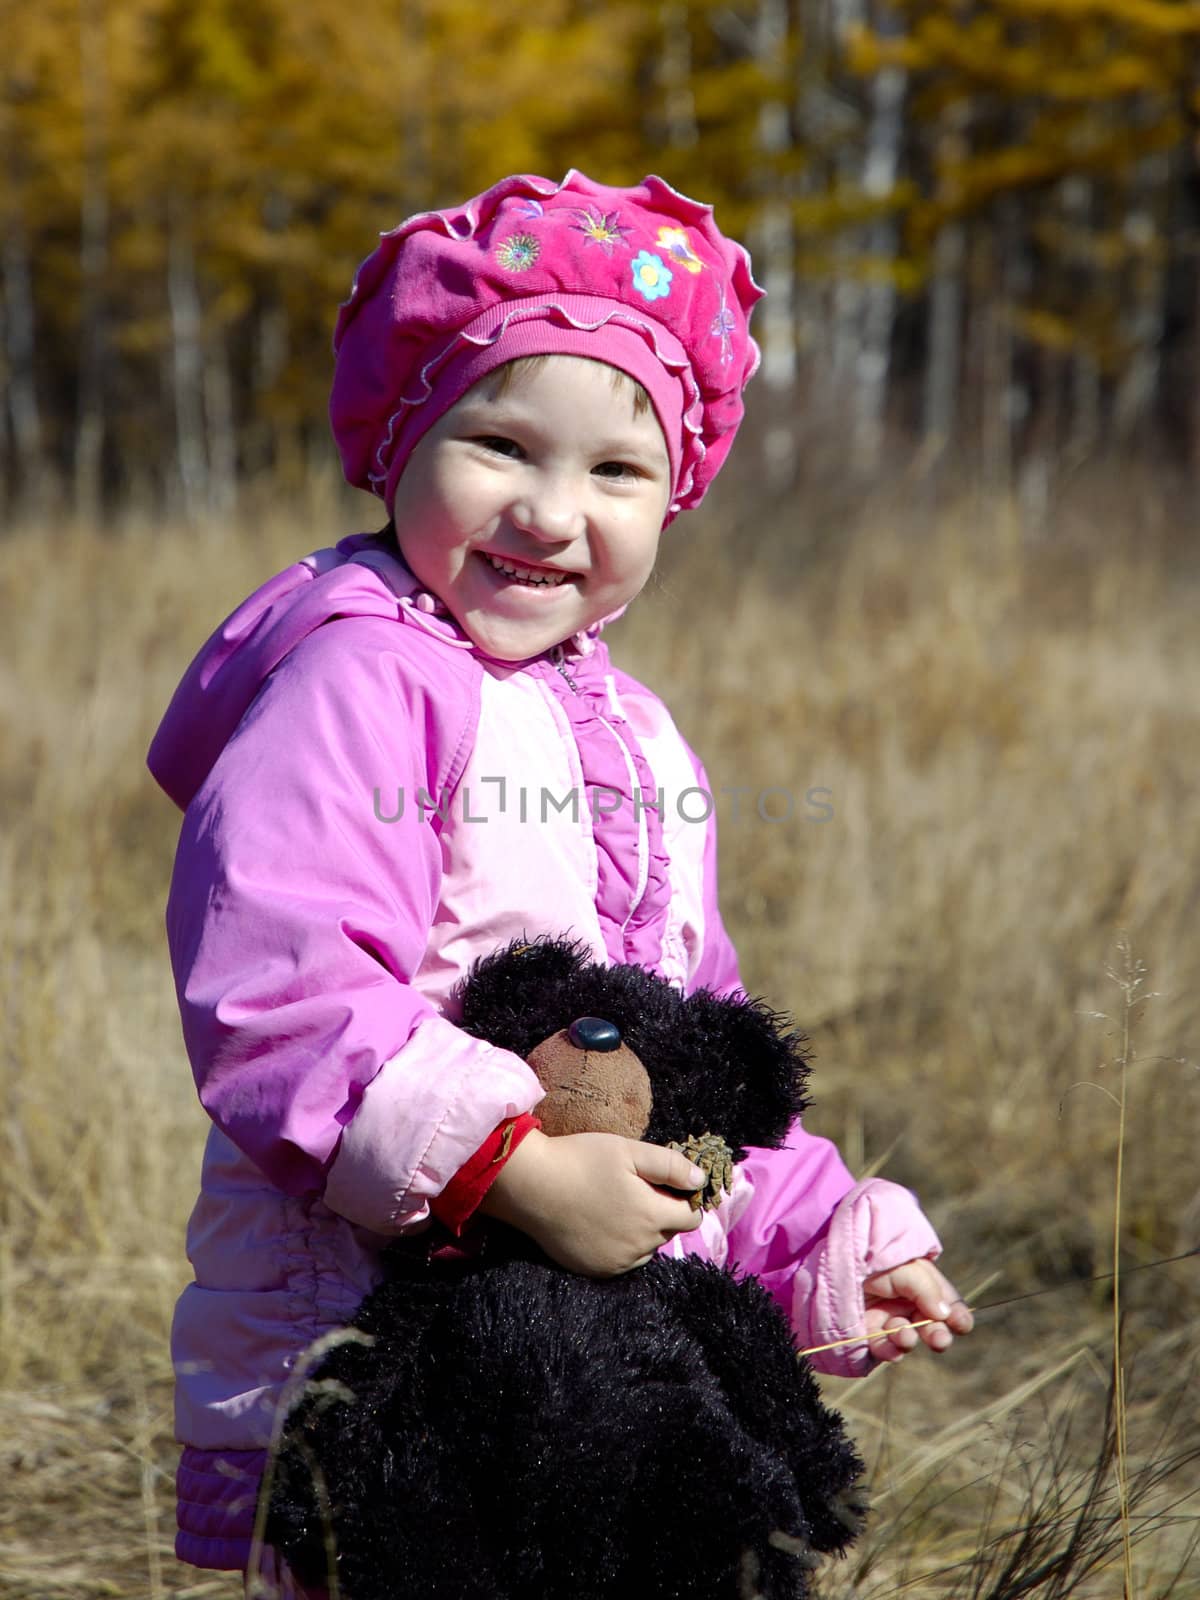 Little girl in pink suit holding teddy bear in her hand